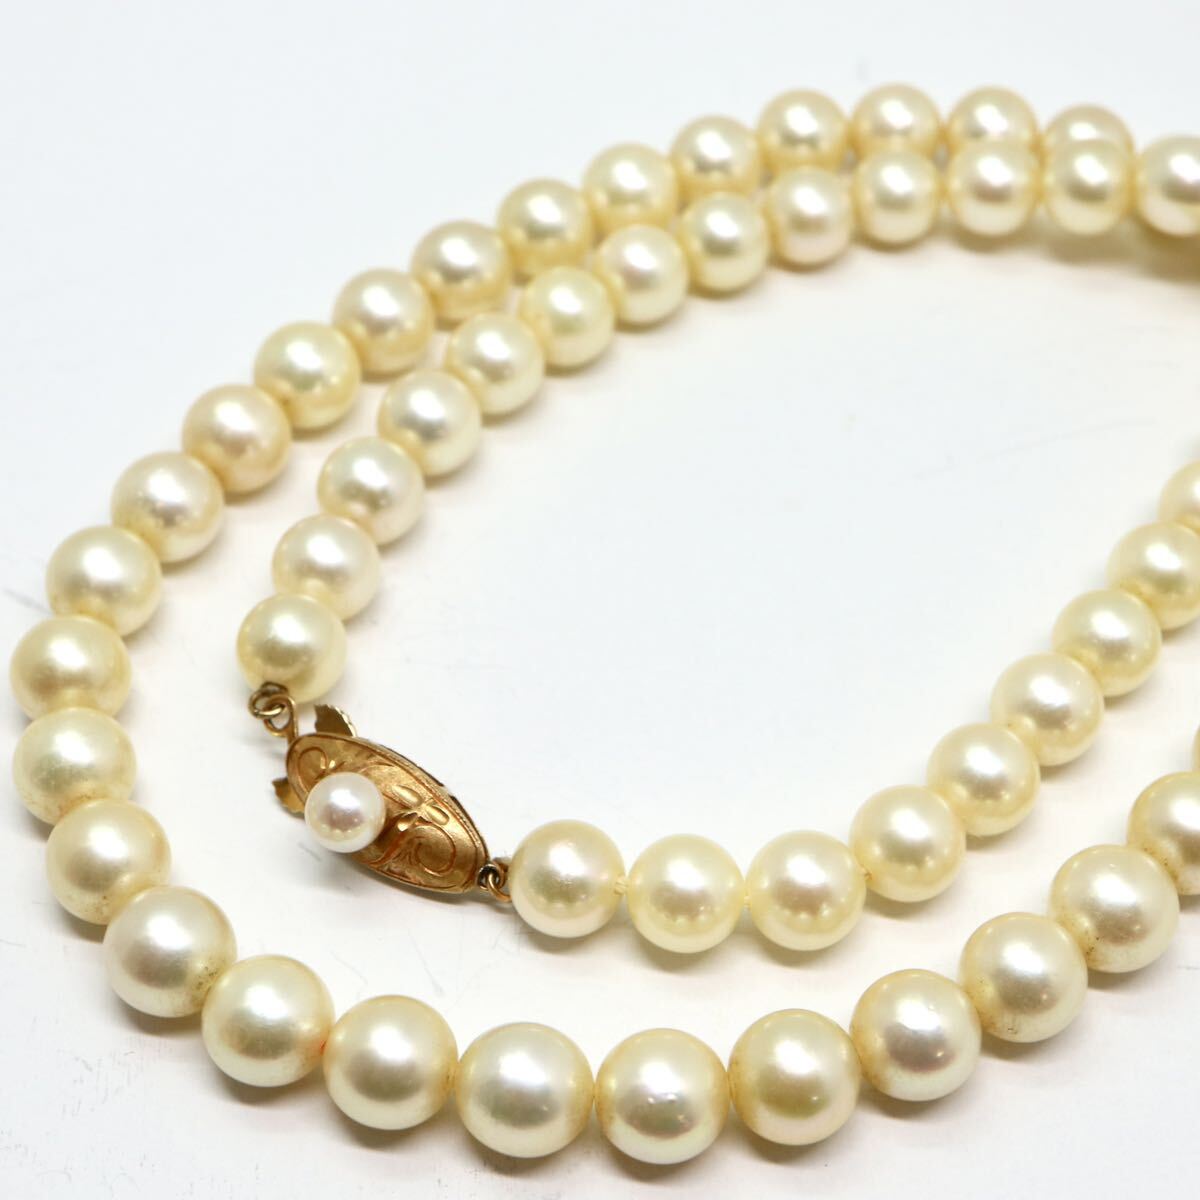 《K18アコヤ本真珠ネックレス》M 約6.5-7.0mm珠 27.5g 約42.5cm pearl necklace ジュエリー jewelry DH0/DH0_画像1